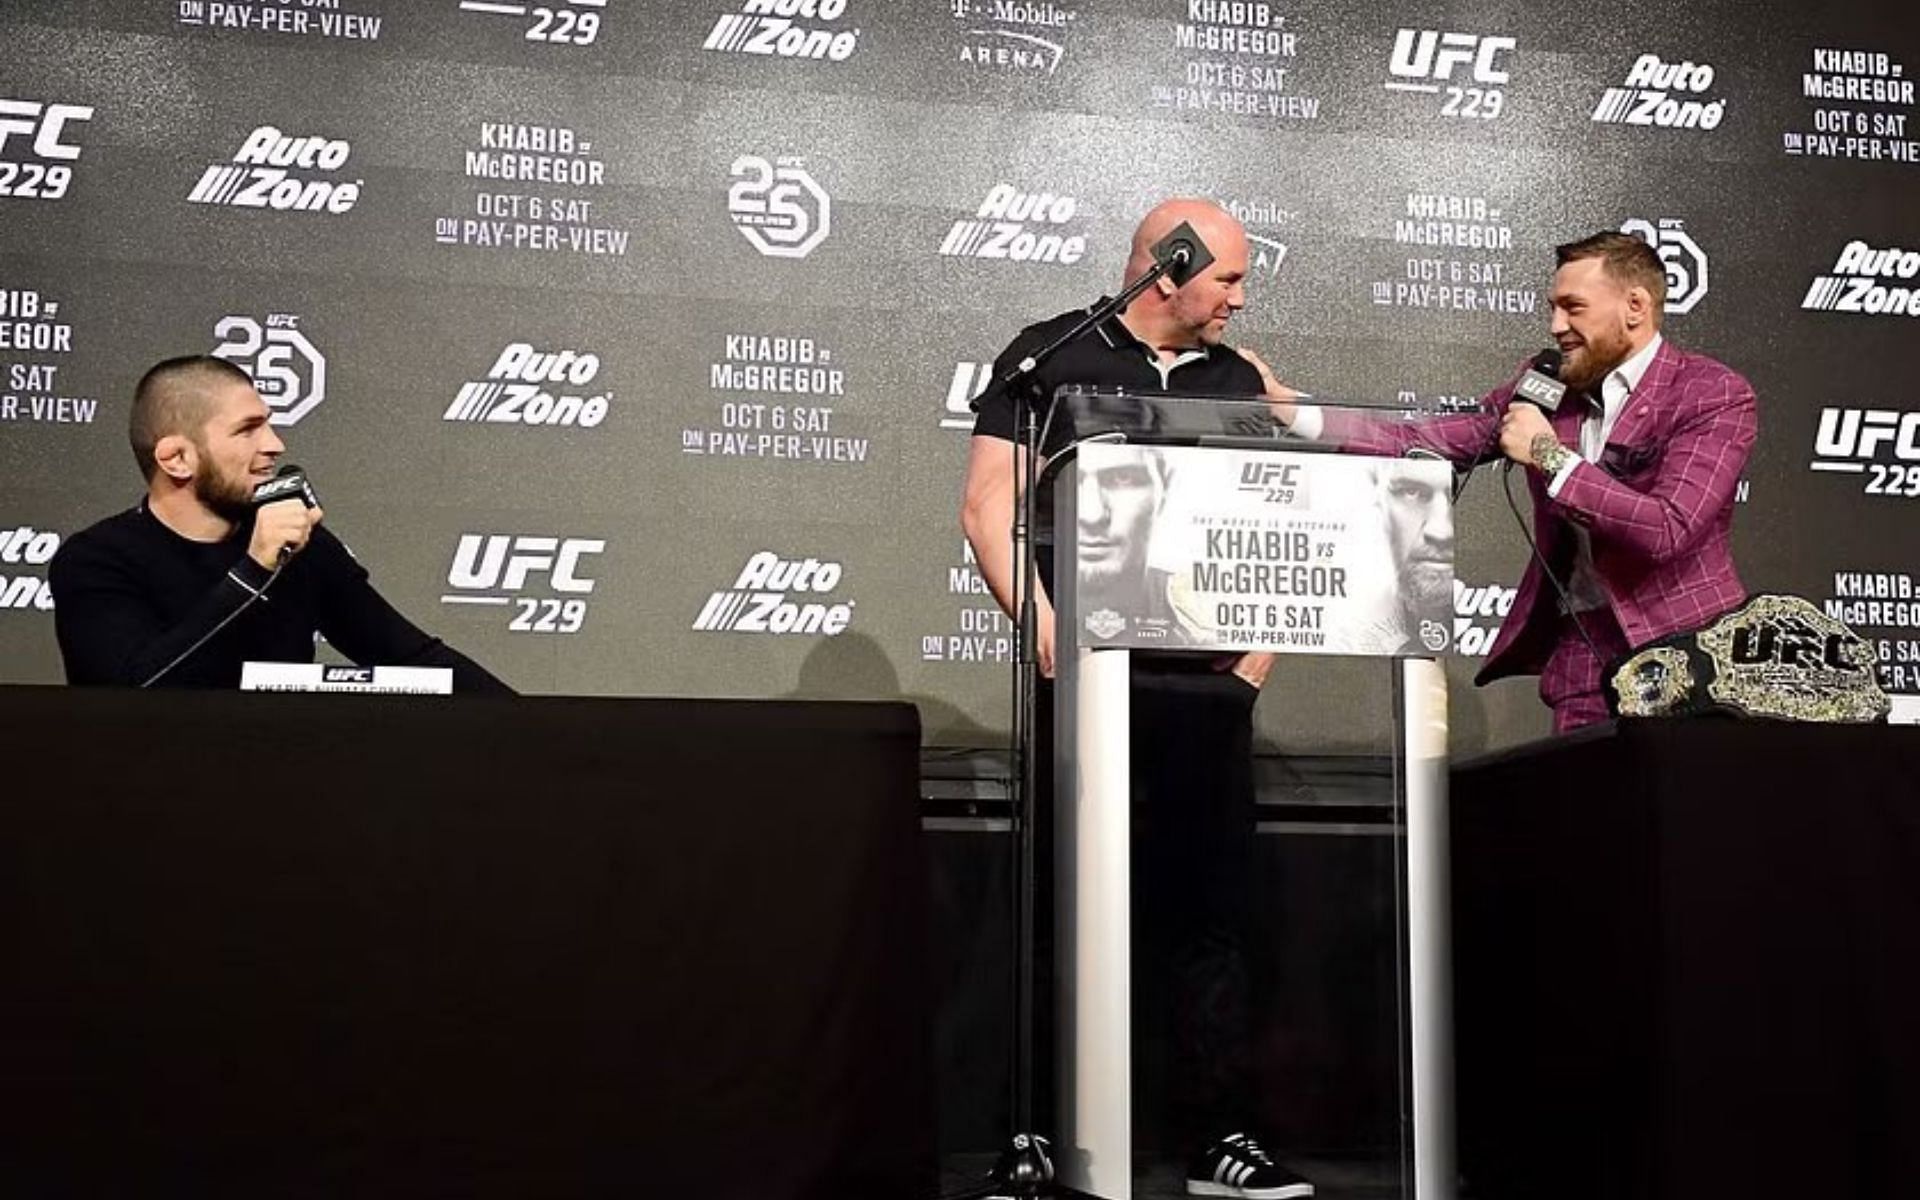 Khabib Nurmagomedov (left) and Conor McGregor (right) during the UFC 229 press conference (Image courtesy @JayMMA4 on X)